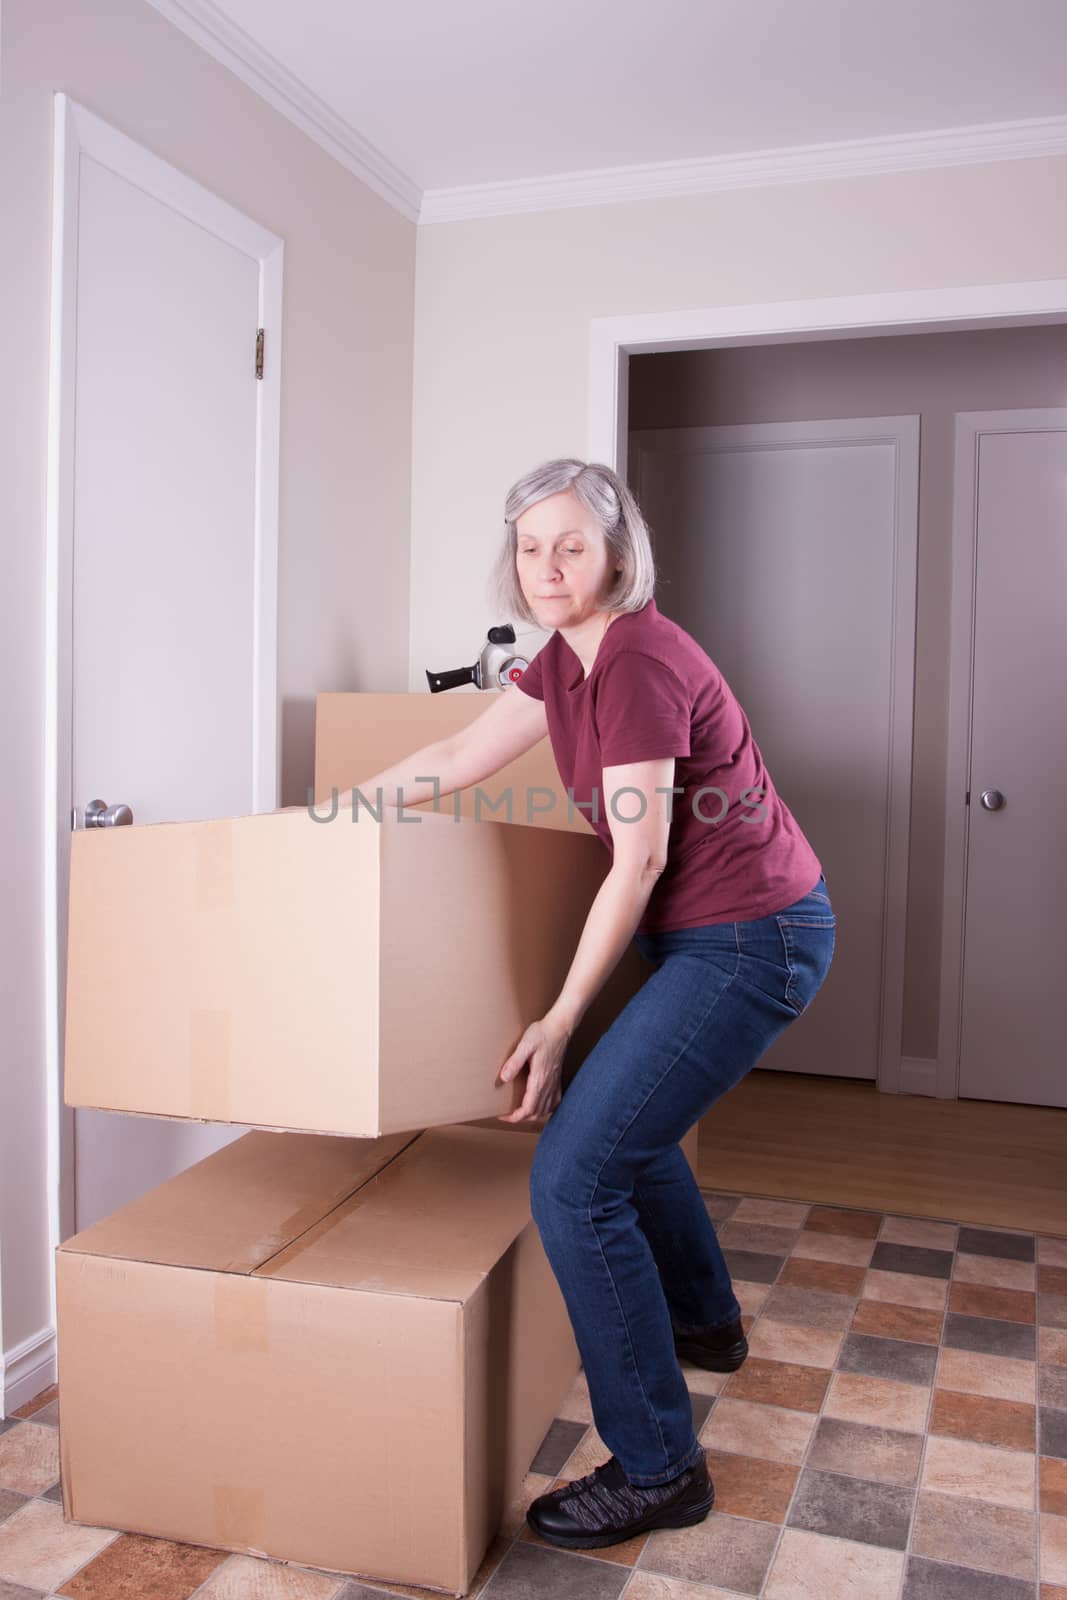 Mature woman prepares to move to another house stacks boxes by lanalanglois